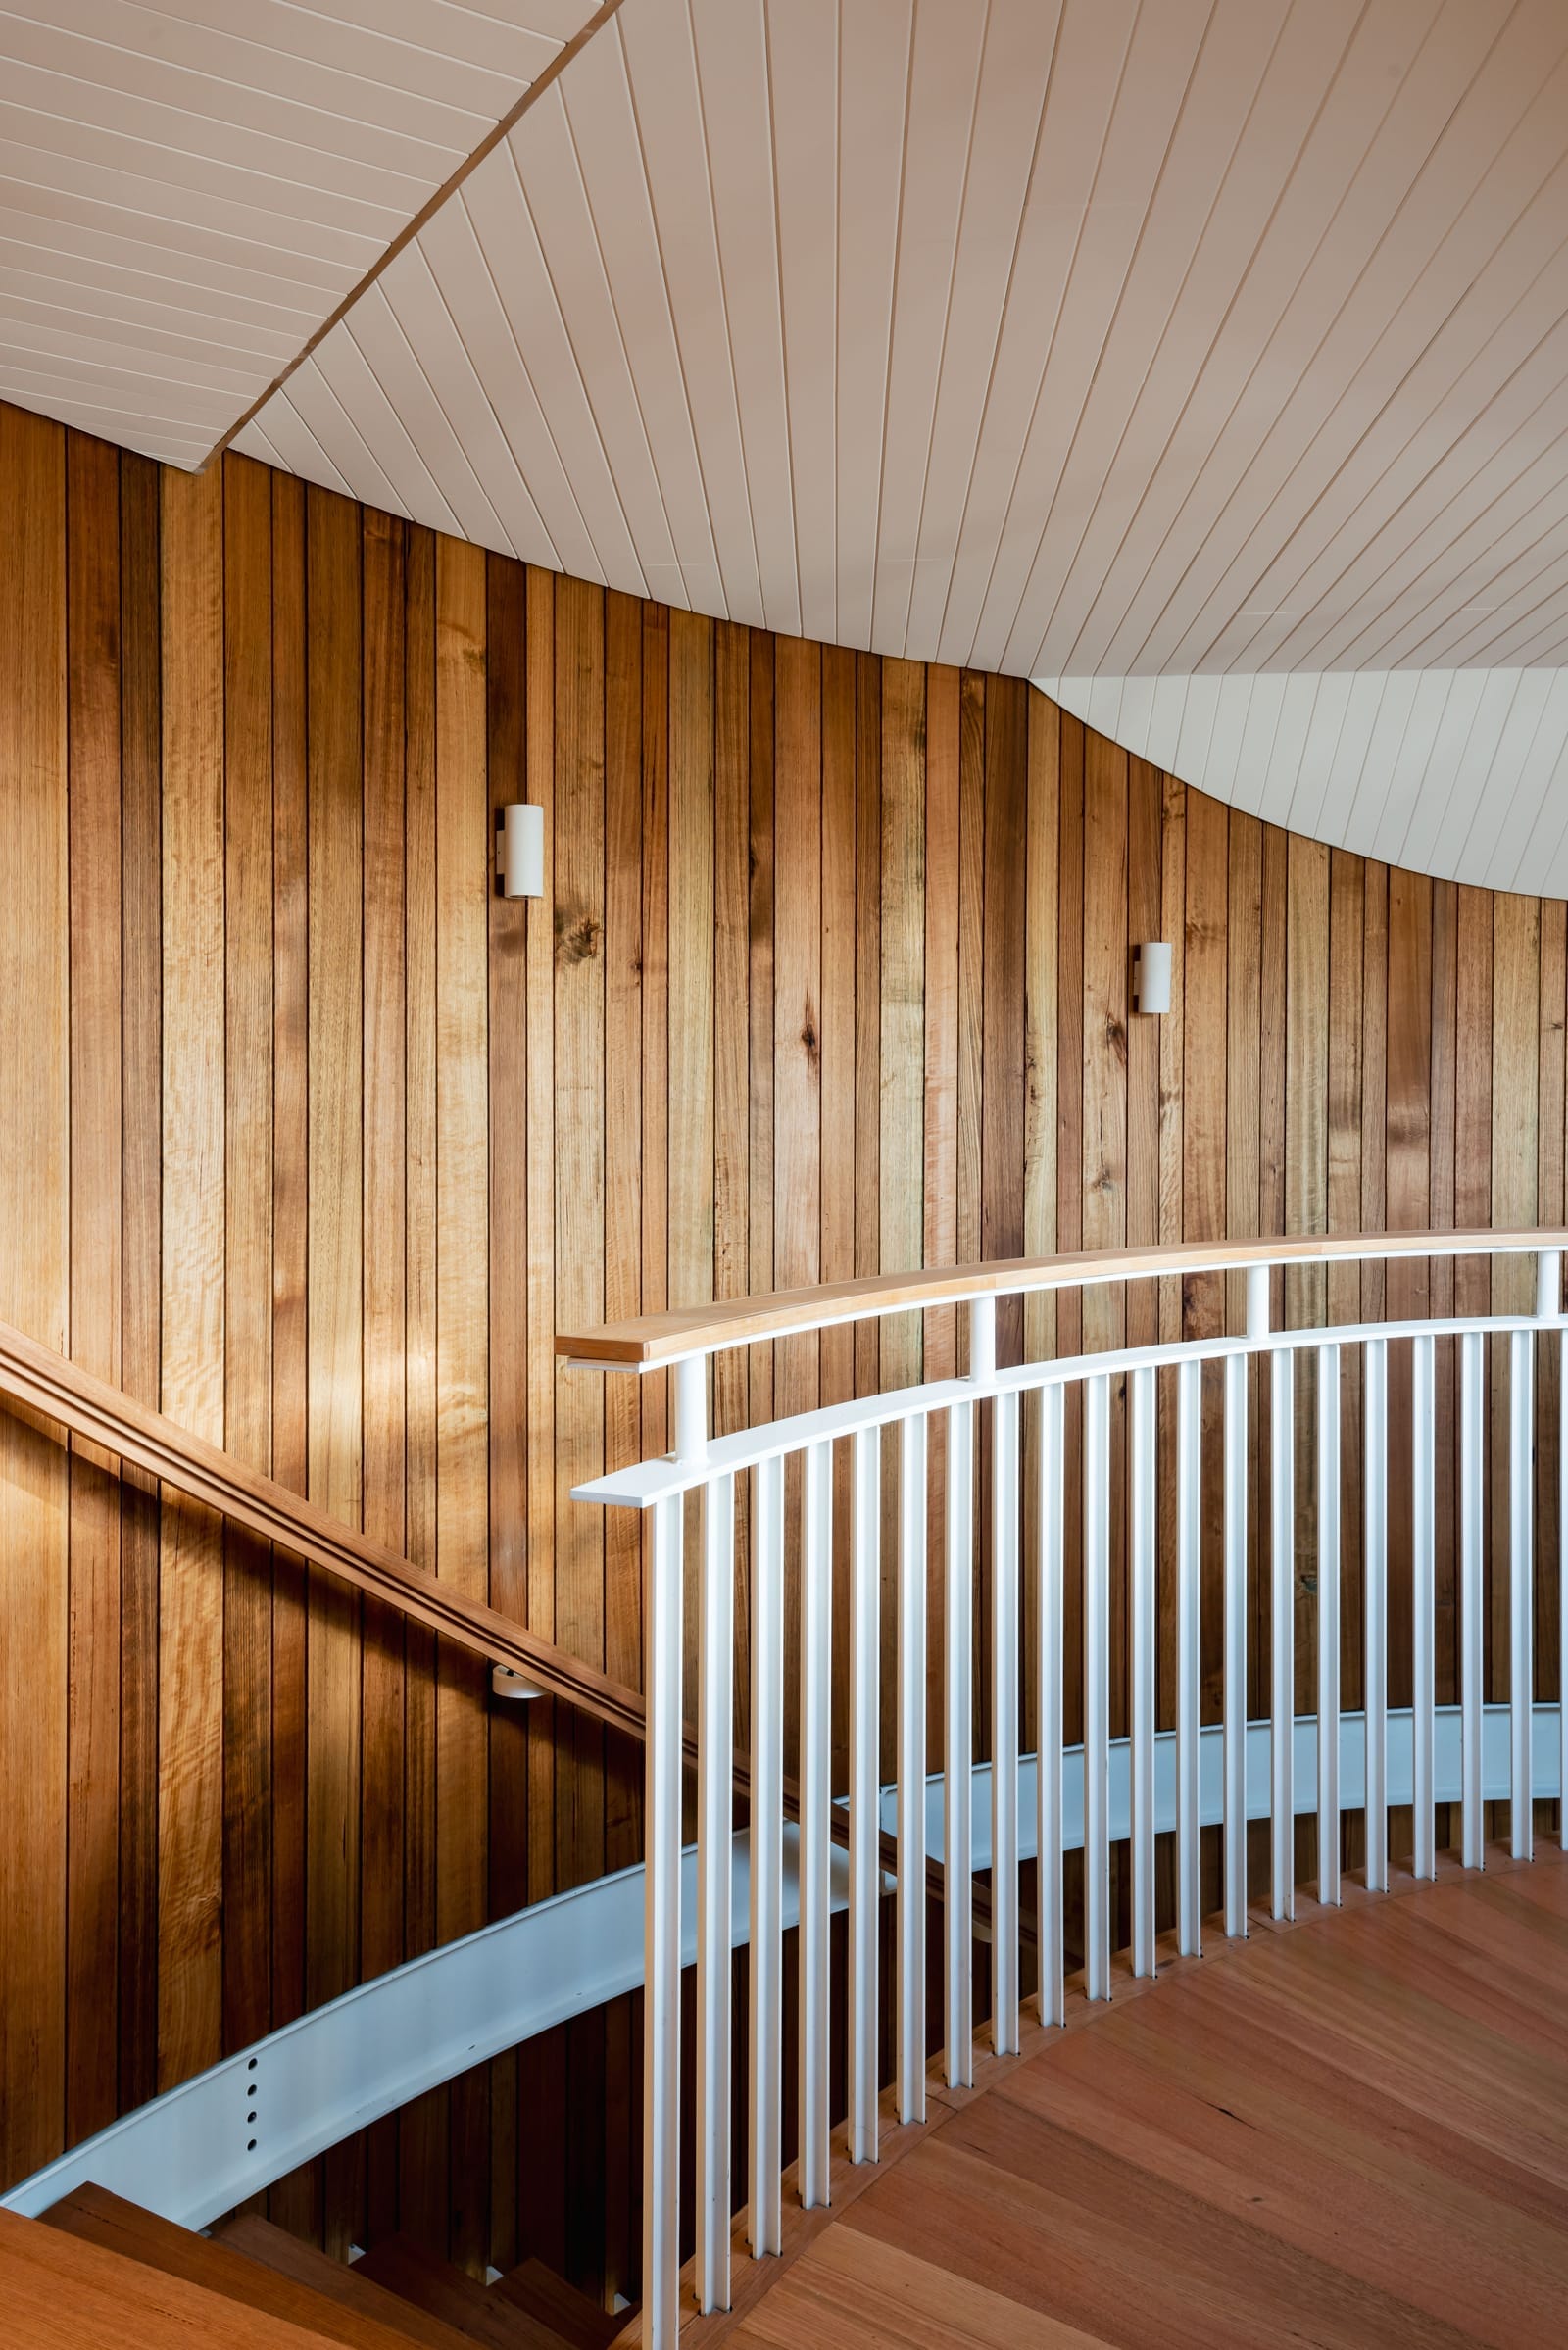 Wattle Bird House by Flett Architecture. Photography by Matt Sansom. Curved timber staircase with metal balustrade. Timber floors and timber walls.